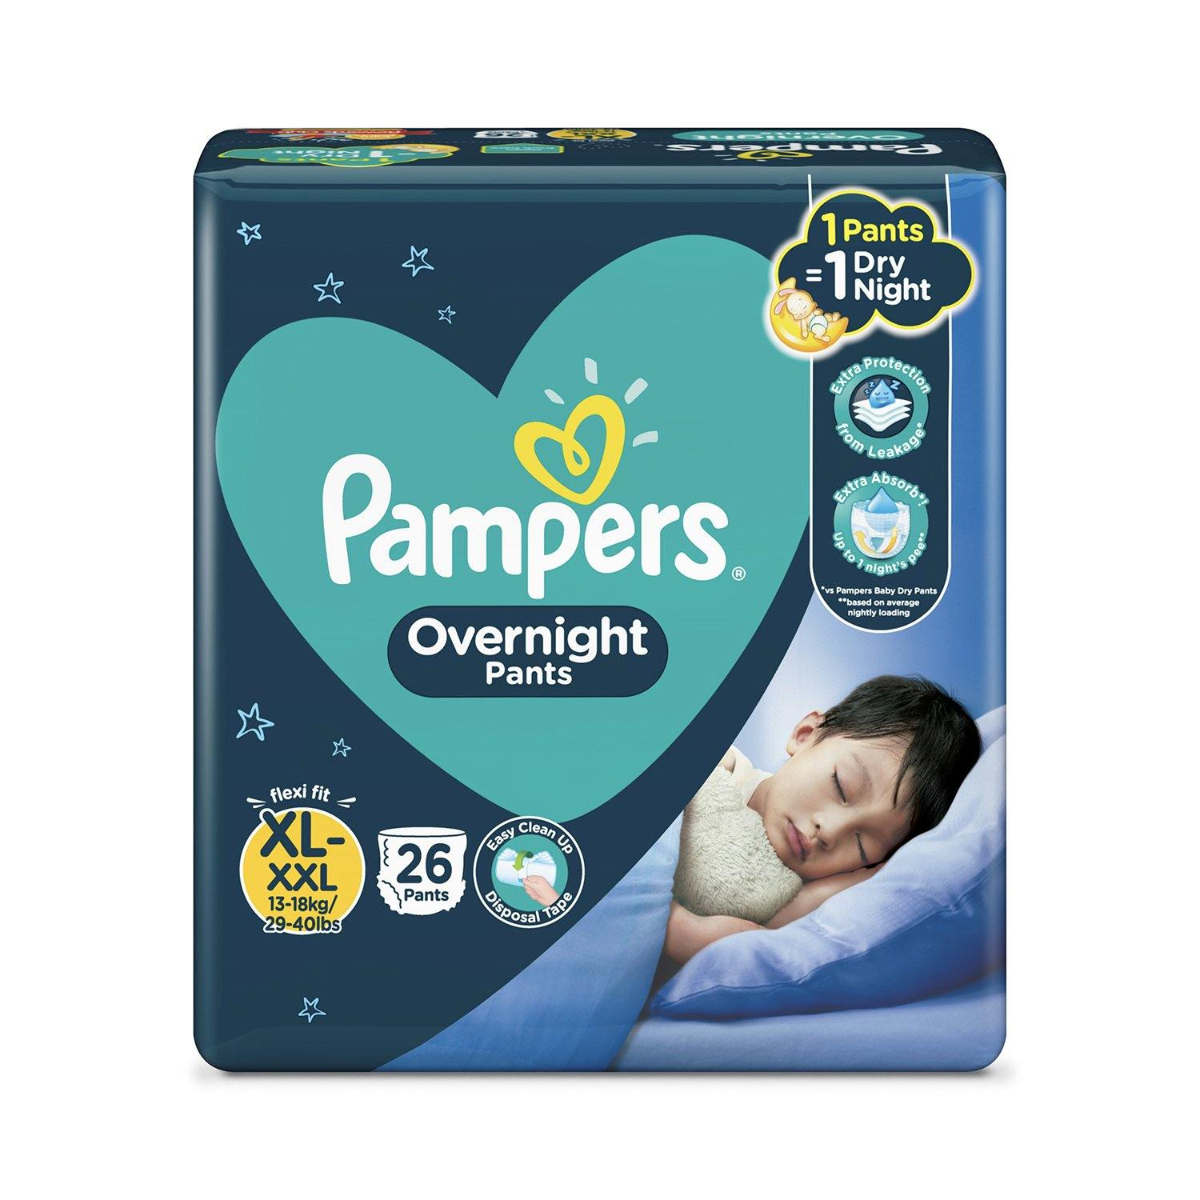 https://d2t3trus7wwxyy.cloudfront.net/catalog/product/p/a/pampers-overnight-pants-value-xl-26s_1.png